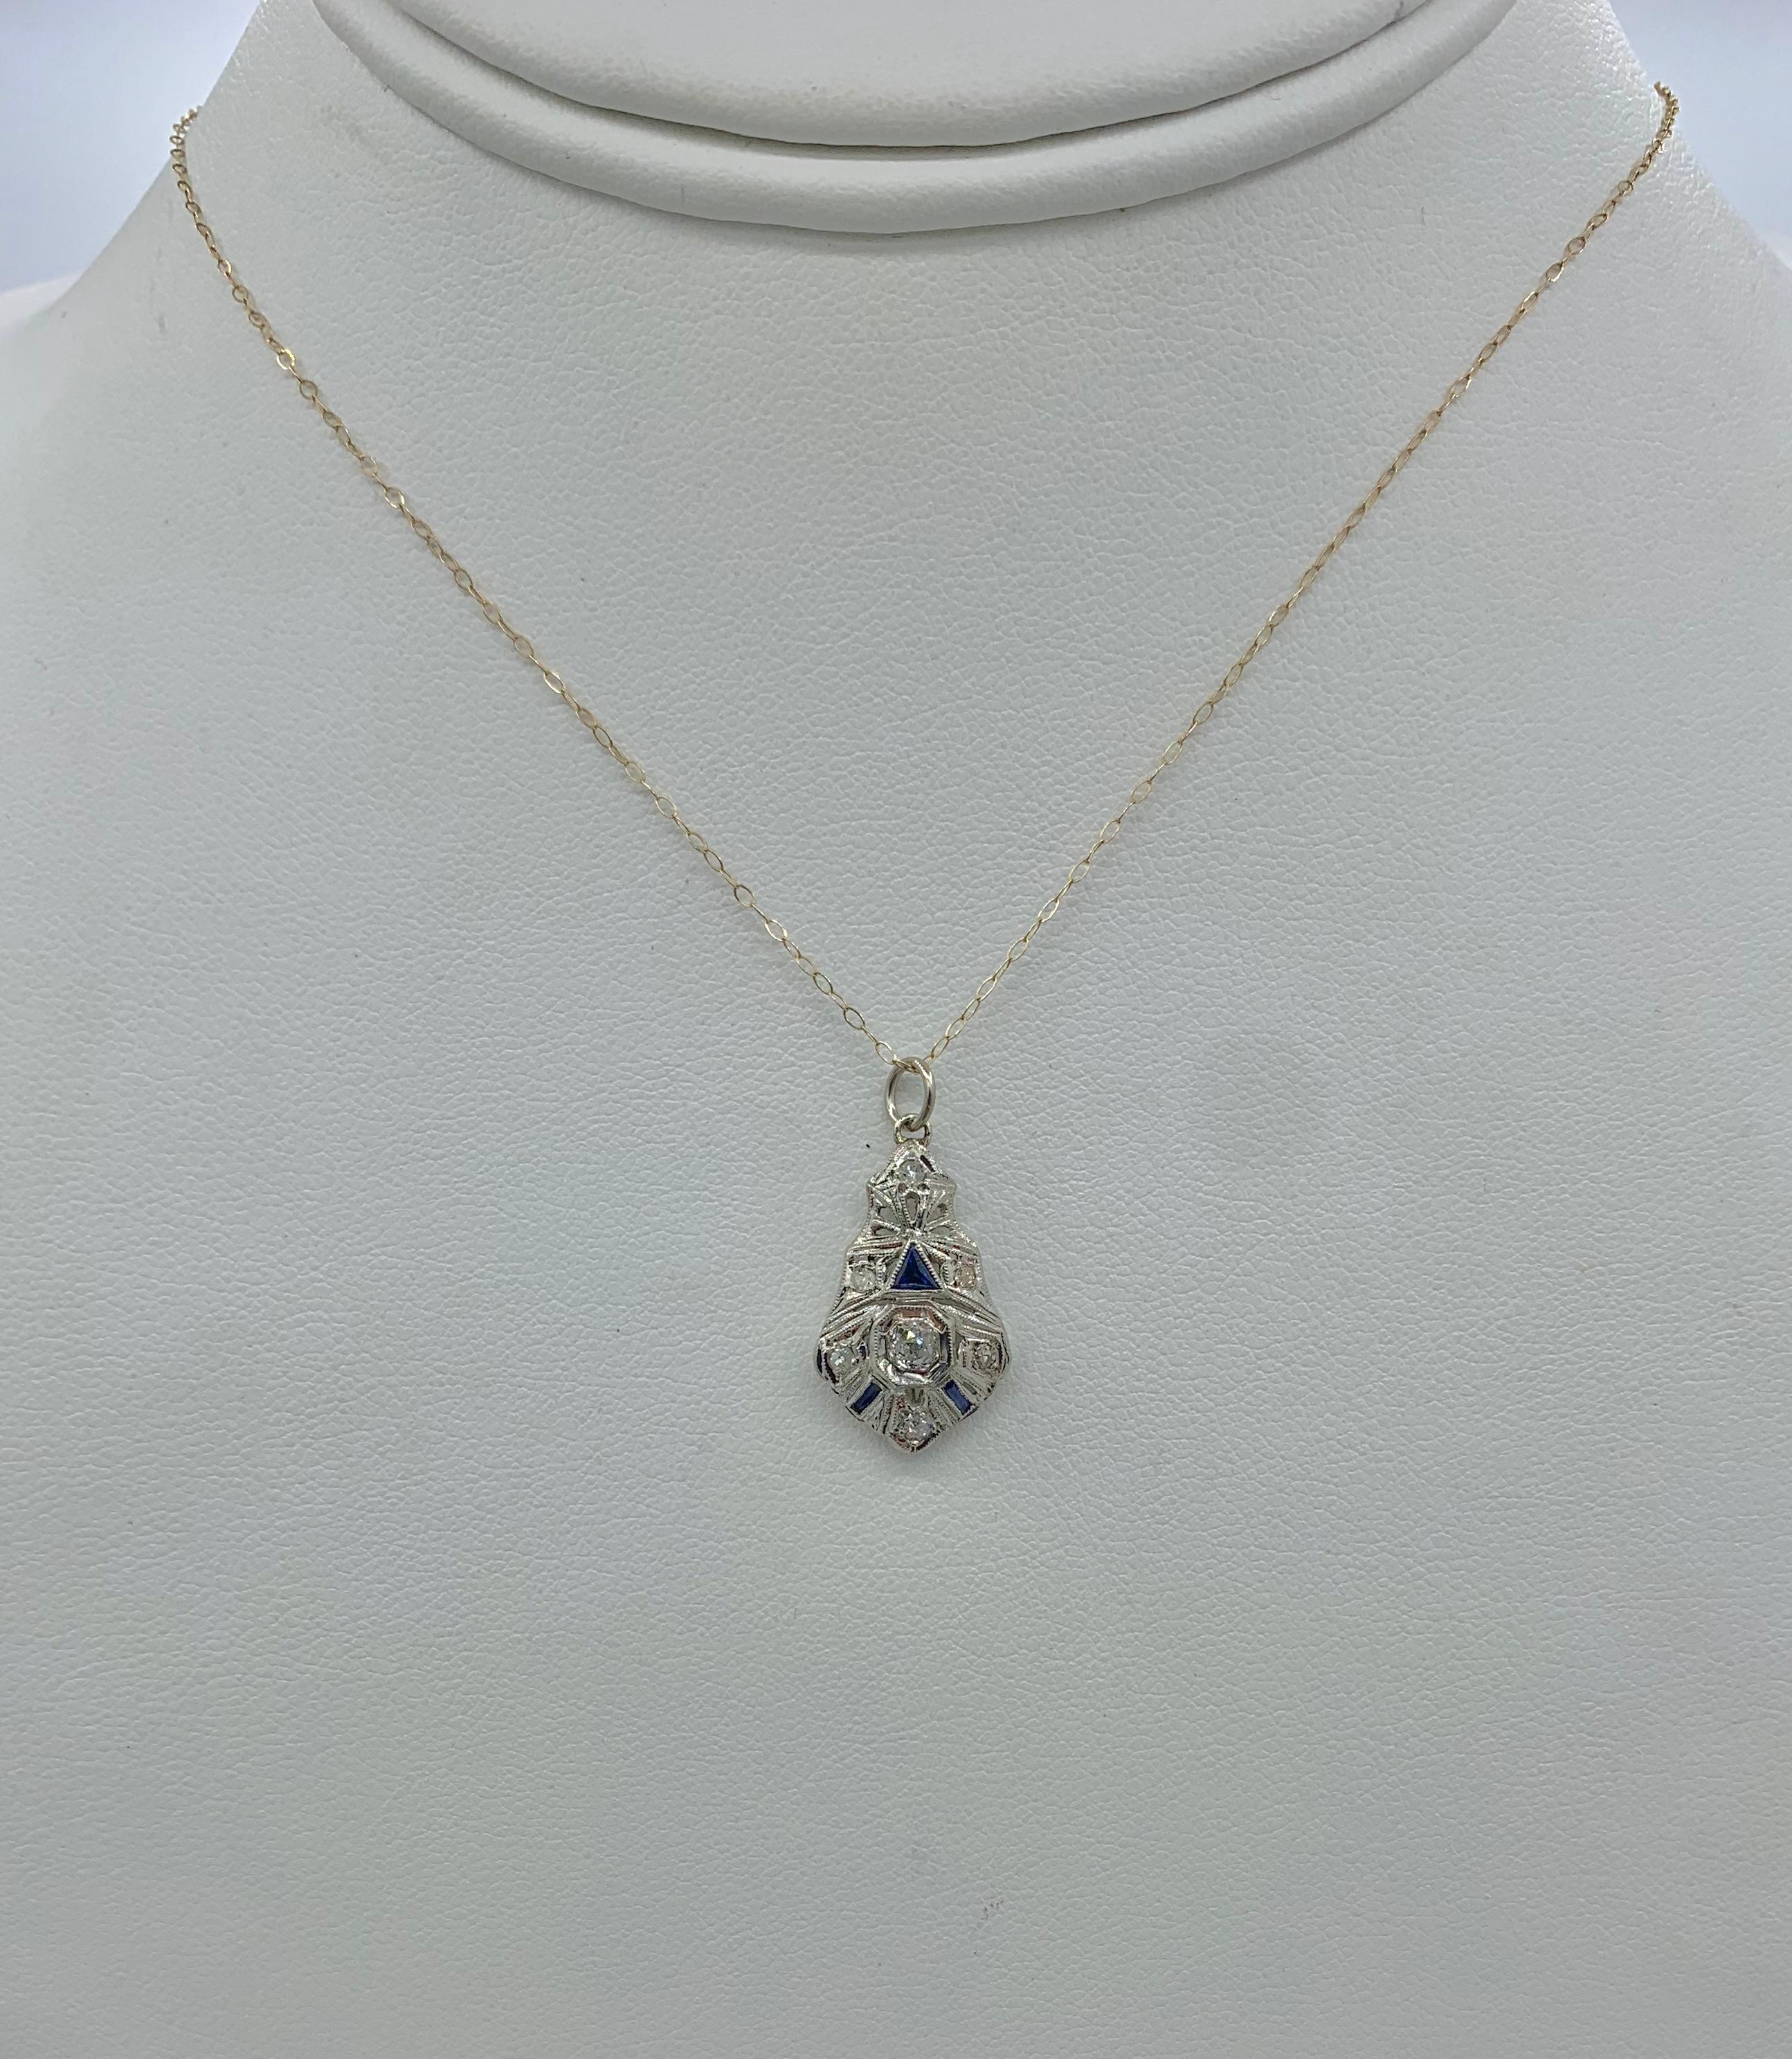 A stunning antique Art Deco - Victorian - Edwardian Diamond Sapphire Lavaliere Pendant in 18 Karat White Gold.  The beautiful pendant has a central sparkling white old mine cut diamond of approximately .15 Carats.  This is surrounded by six